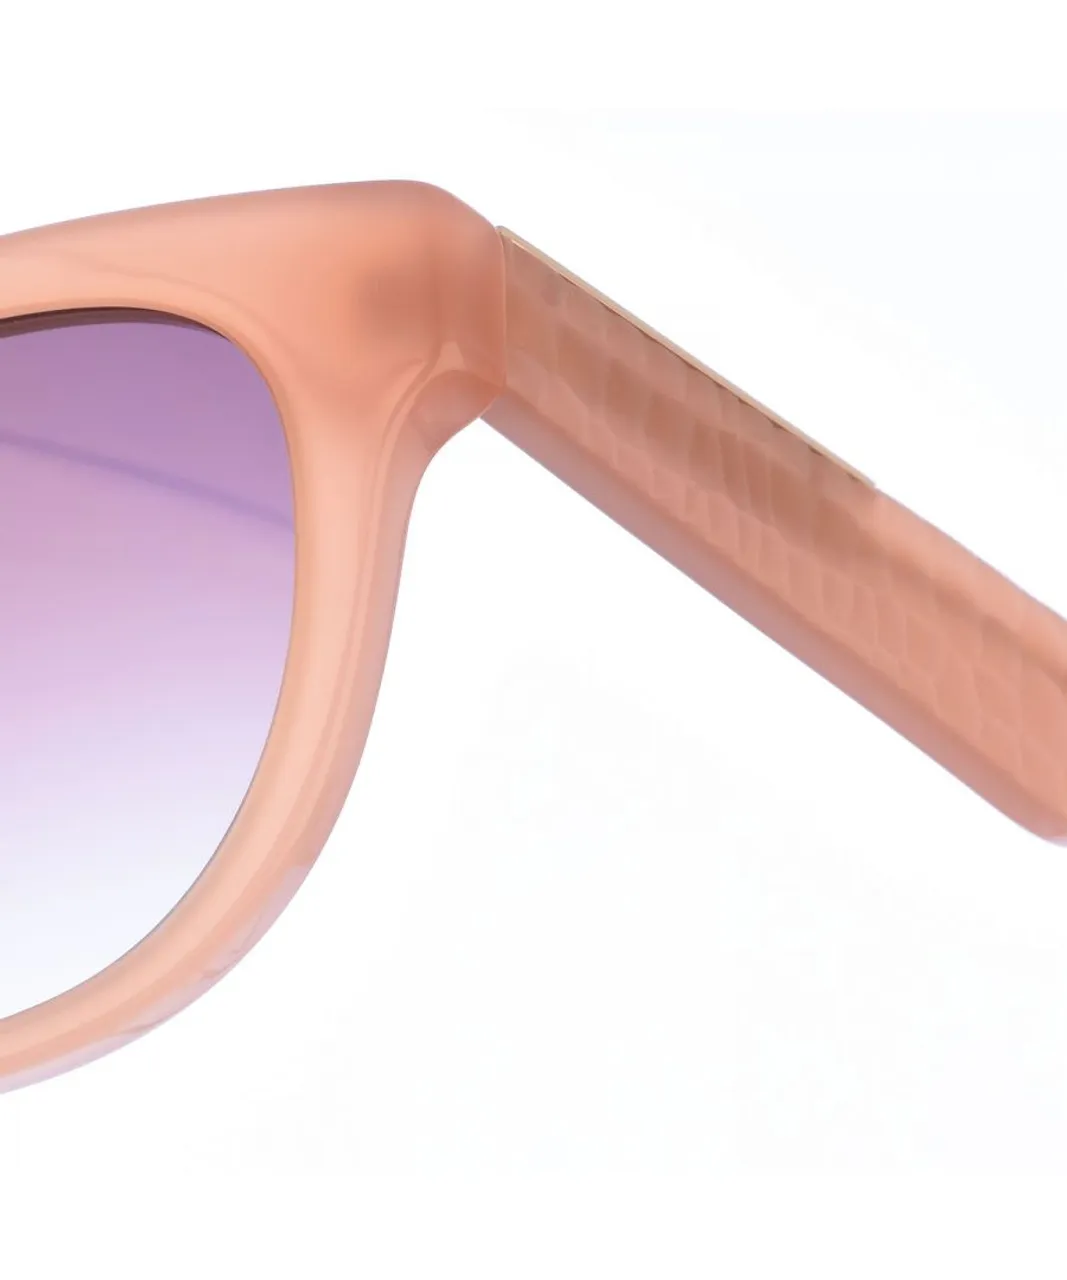 Lacoste Womens Square shaped acetate sunglasses L971S women - Rose - One